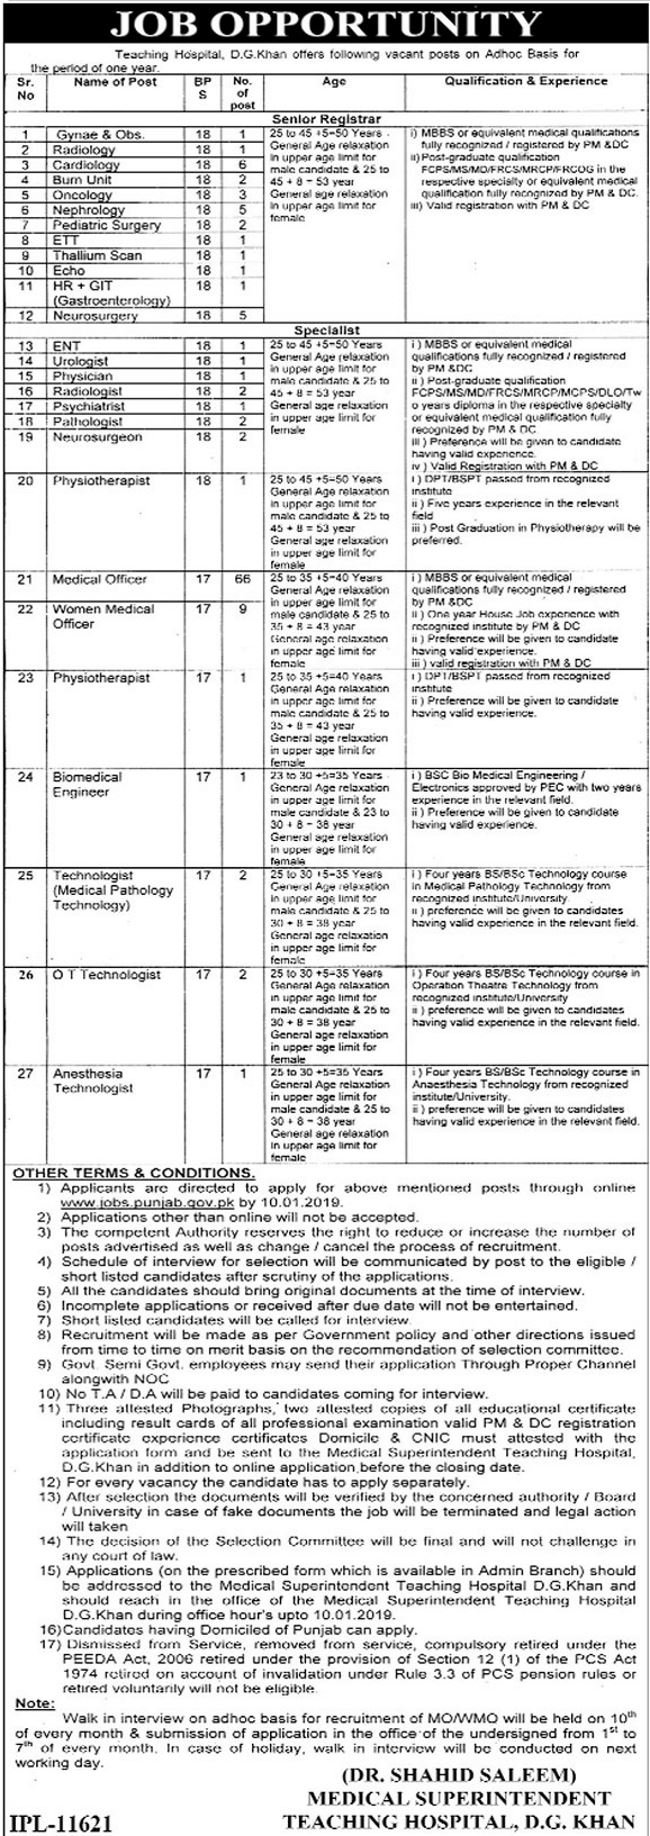 Teaching Hospital DG Khan Jobs 2019 for 150+ Medical Officers & Other Paramedic & Specialists